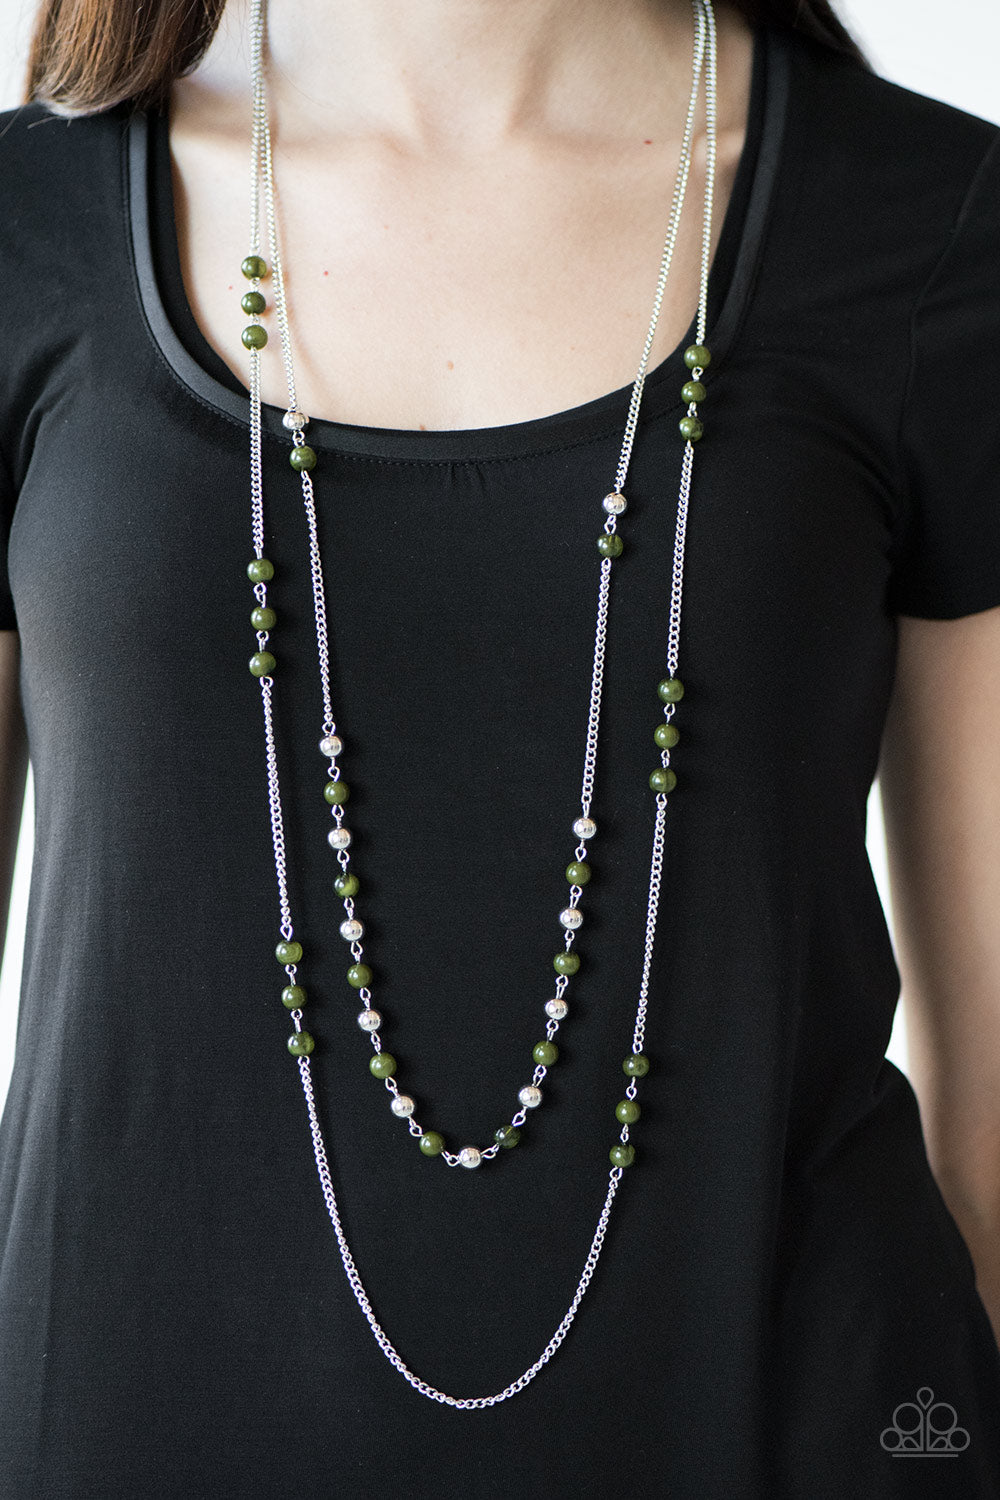 Prismatic Sunsets - Green - Paparazzi necklace